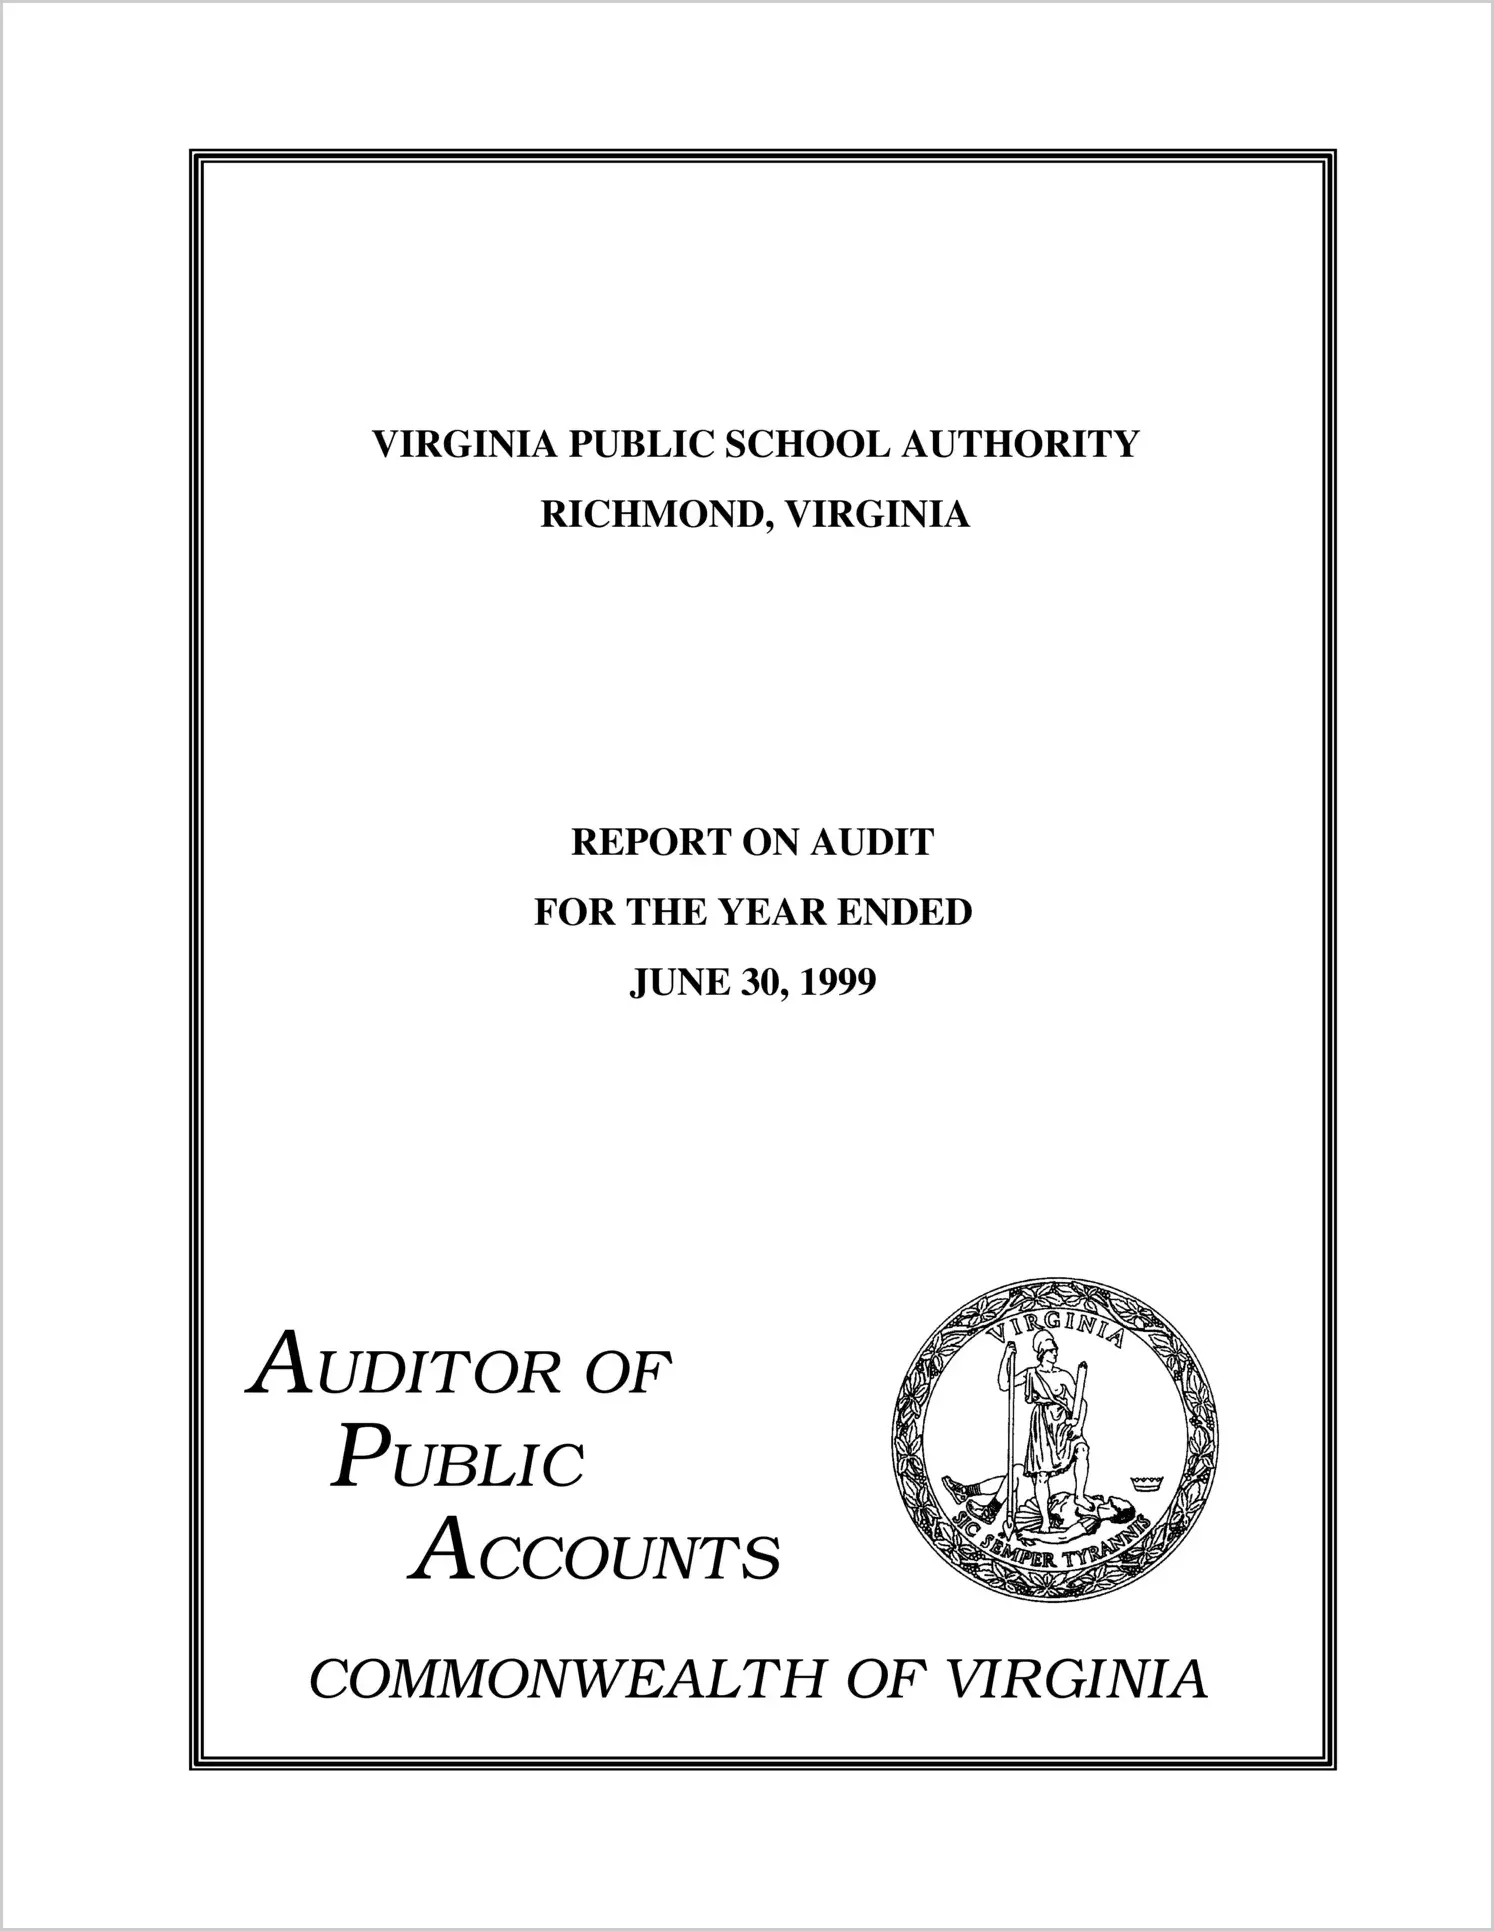 Virginia Public School Authority for the year ended June 30, 1999